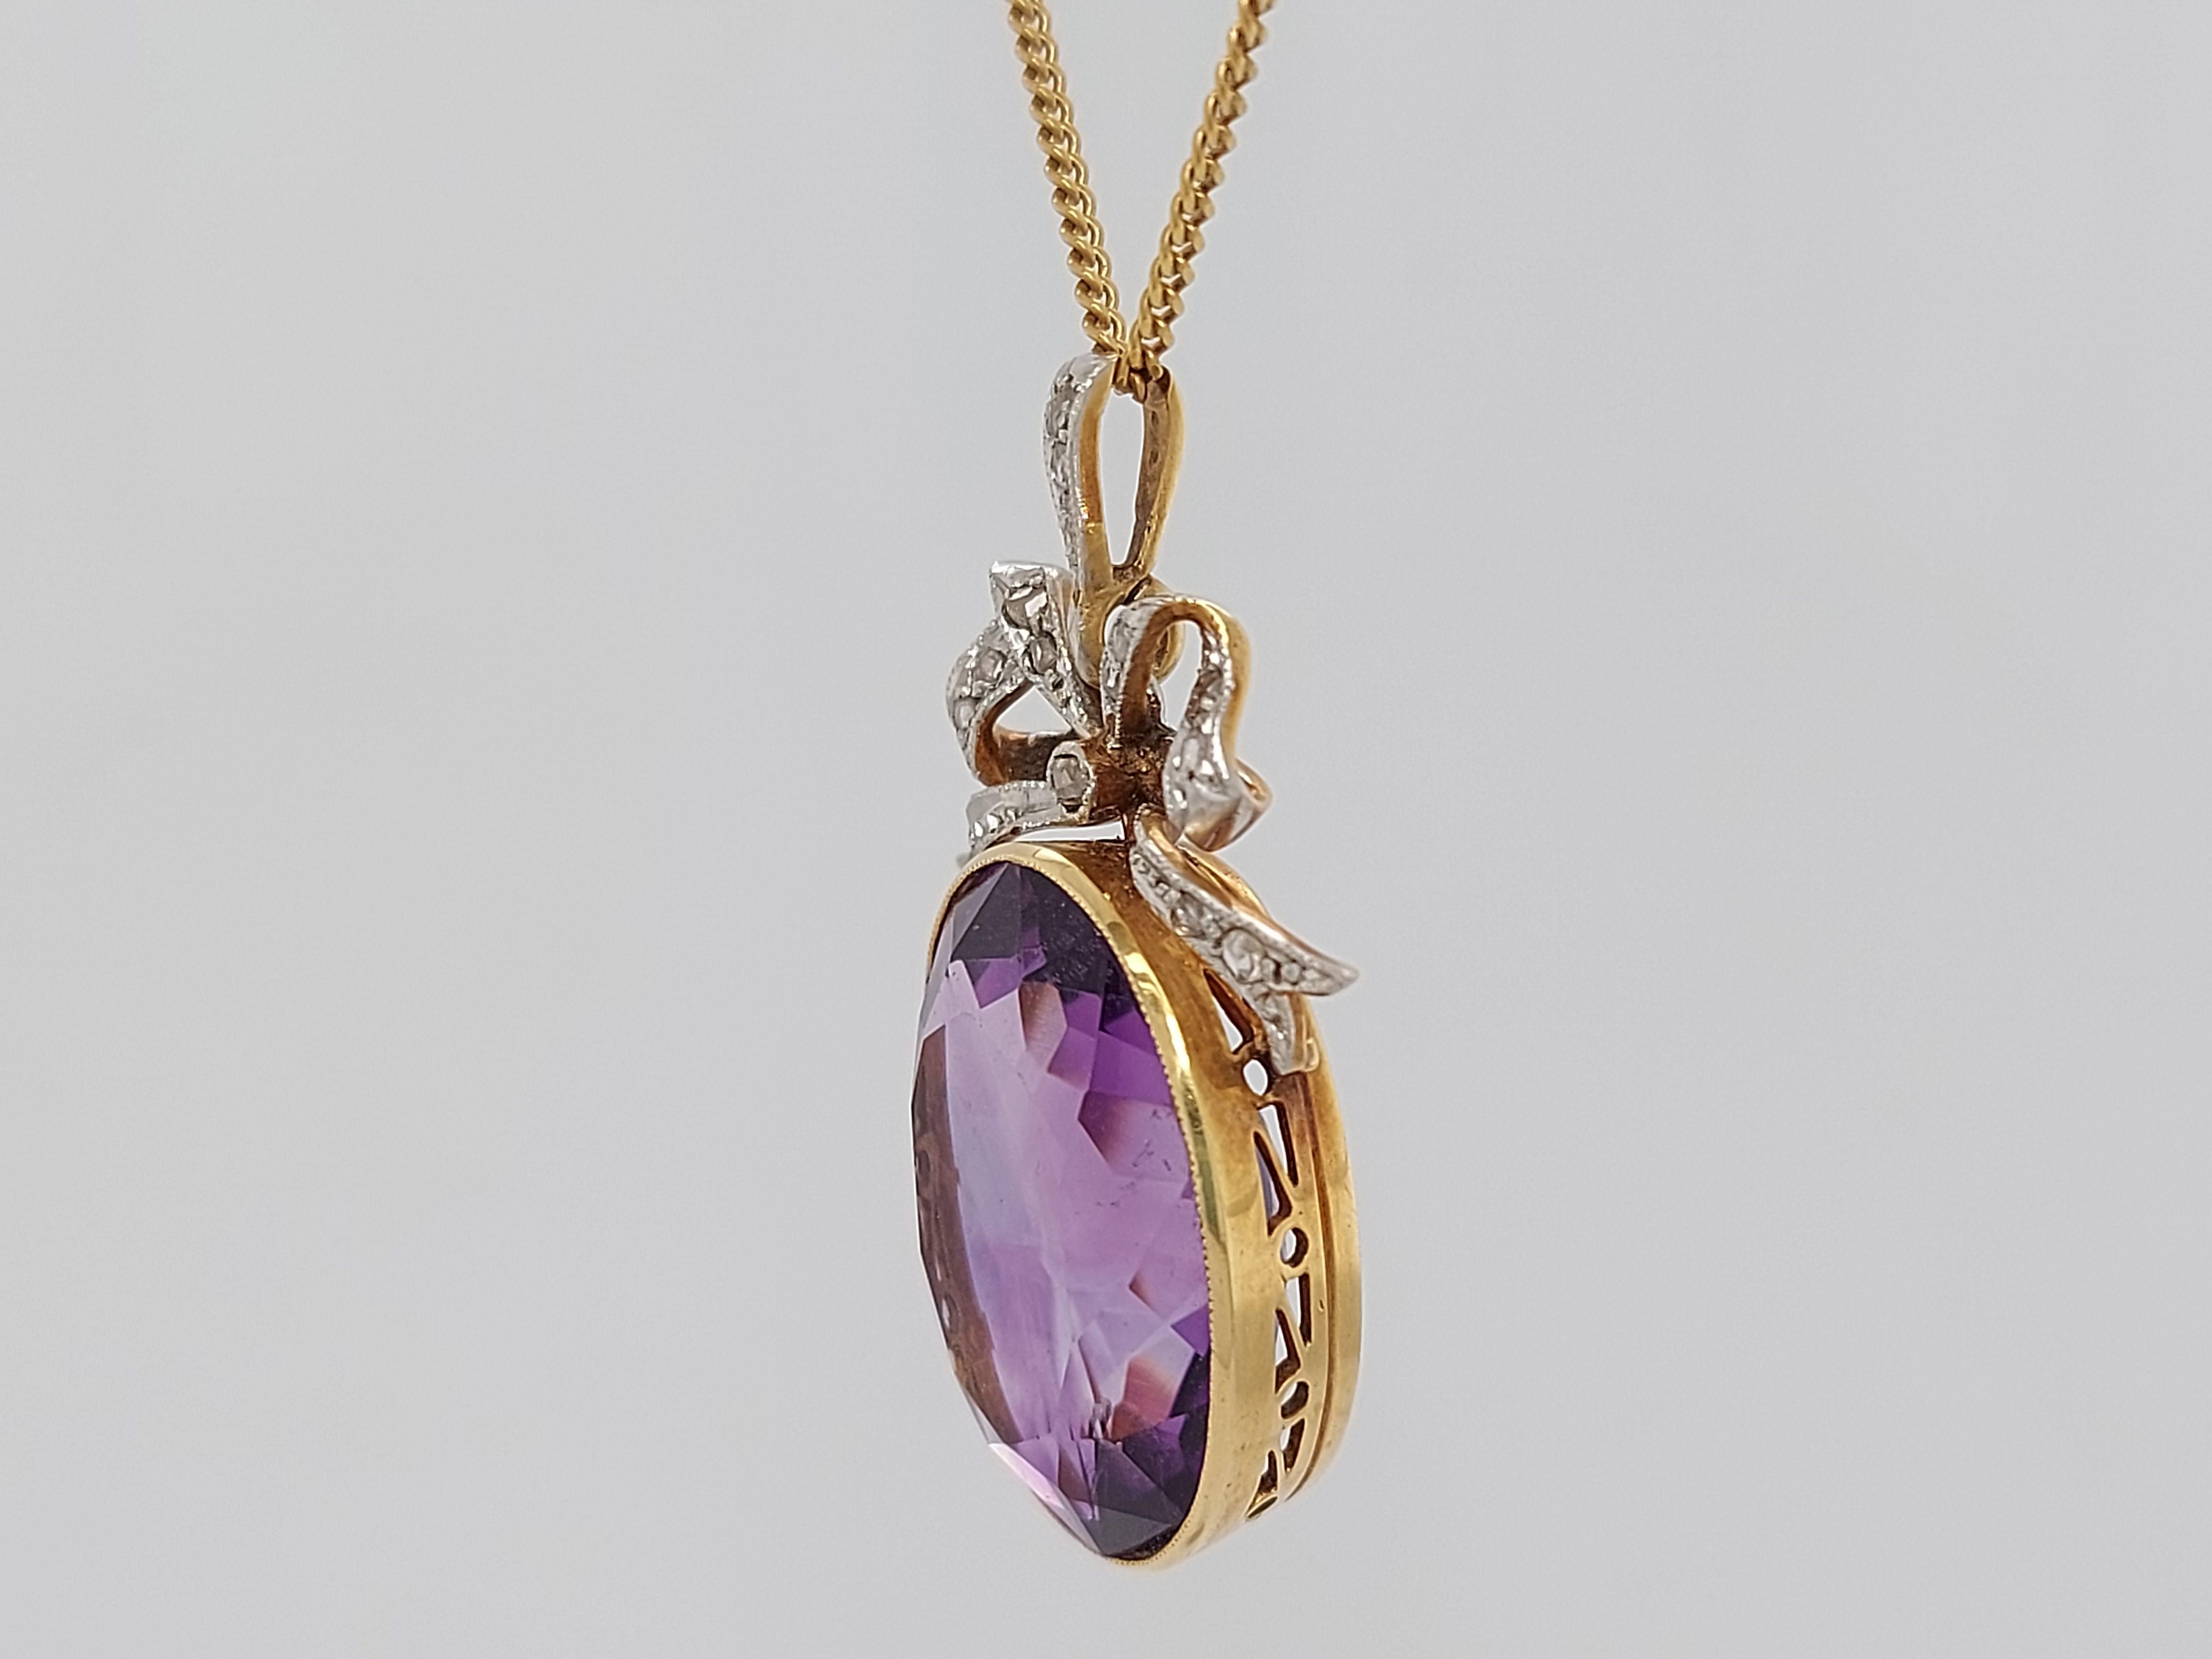 Vintage Yellow Gold Pendant Necklace with Amethyst and Rose Cut Diamonds For Sale 1